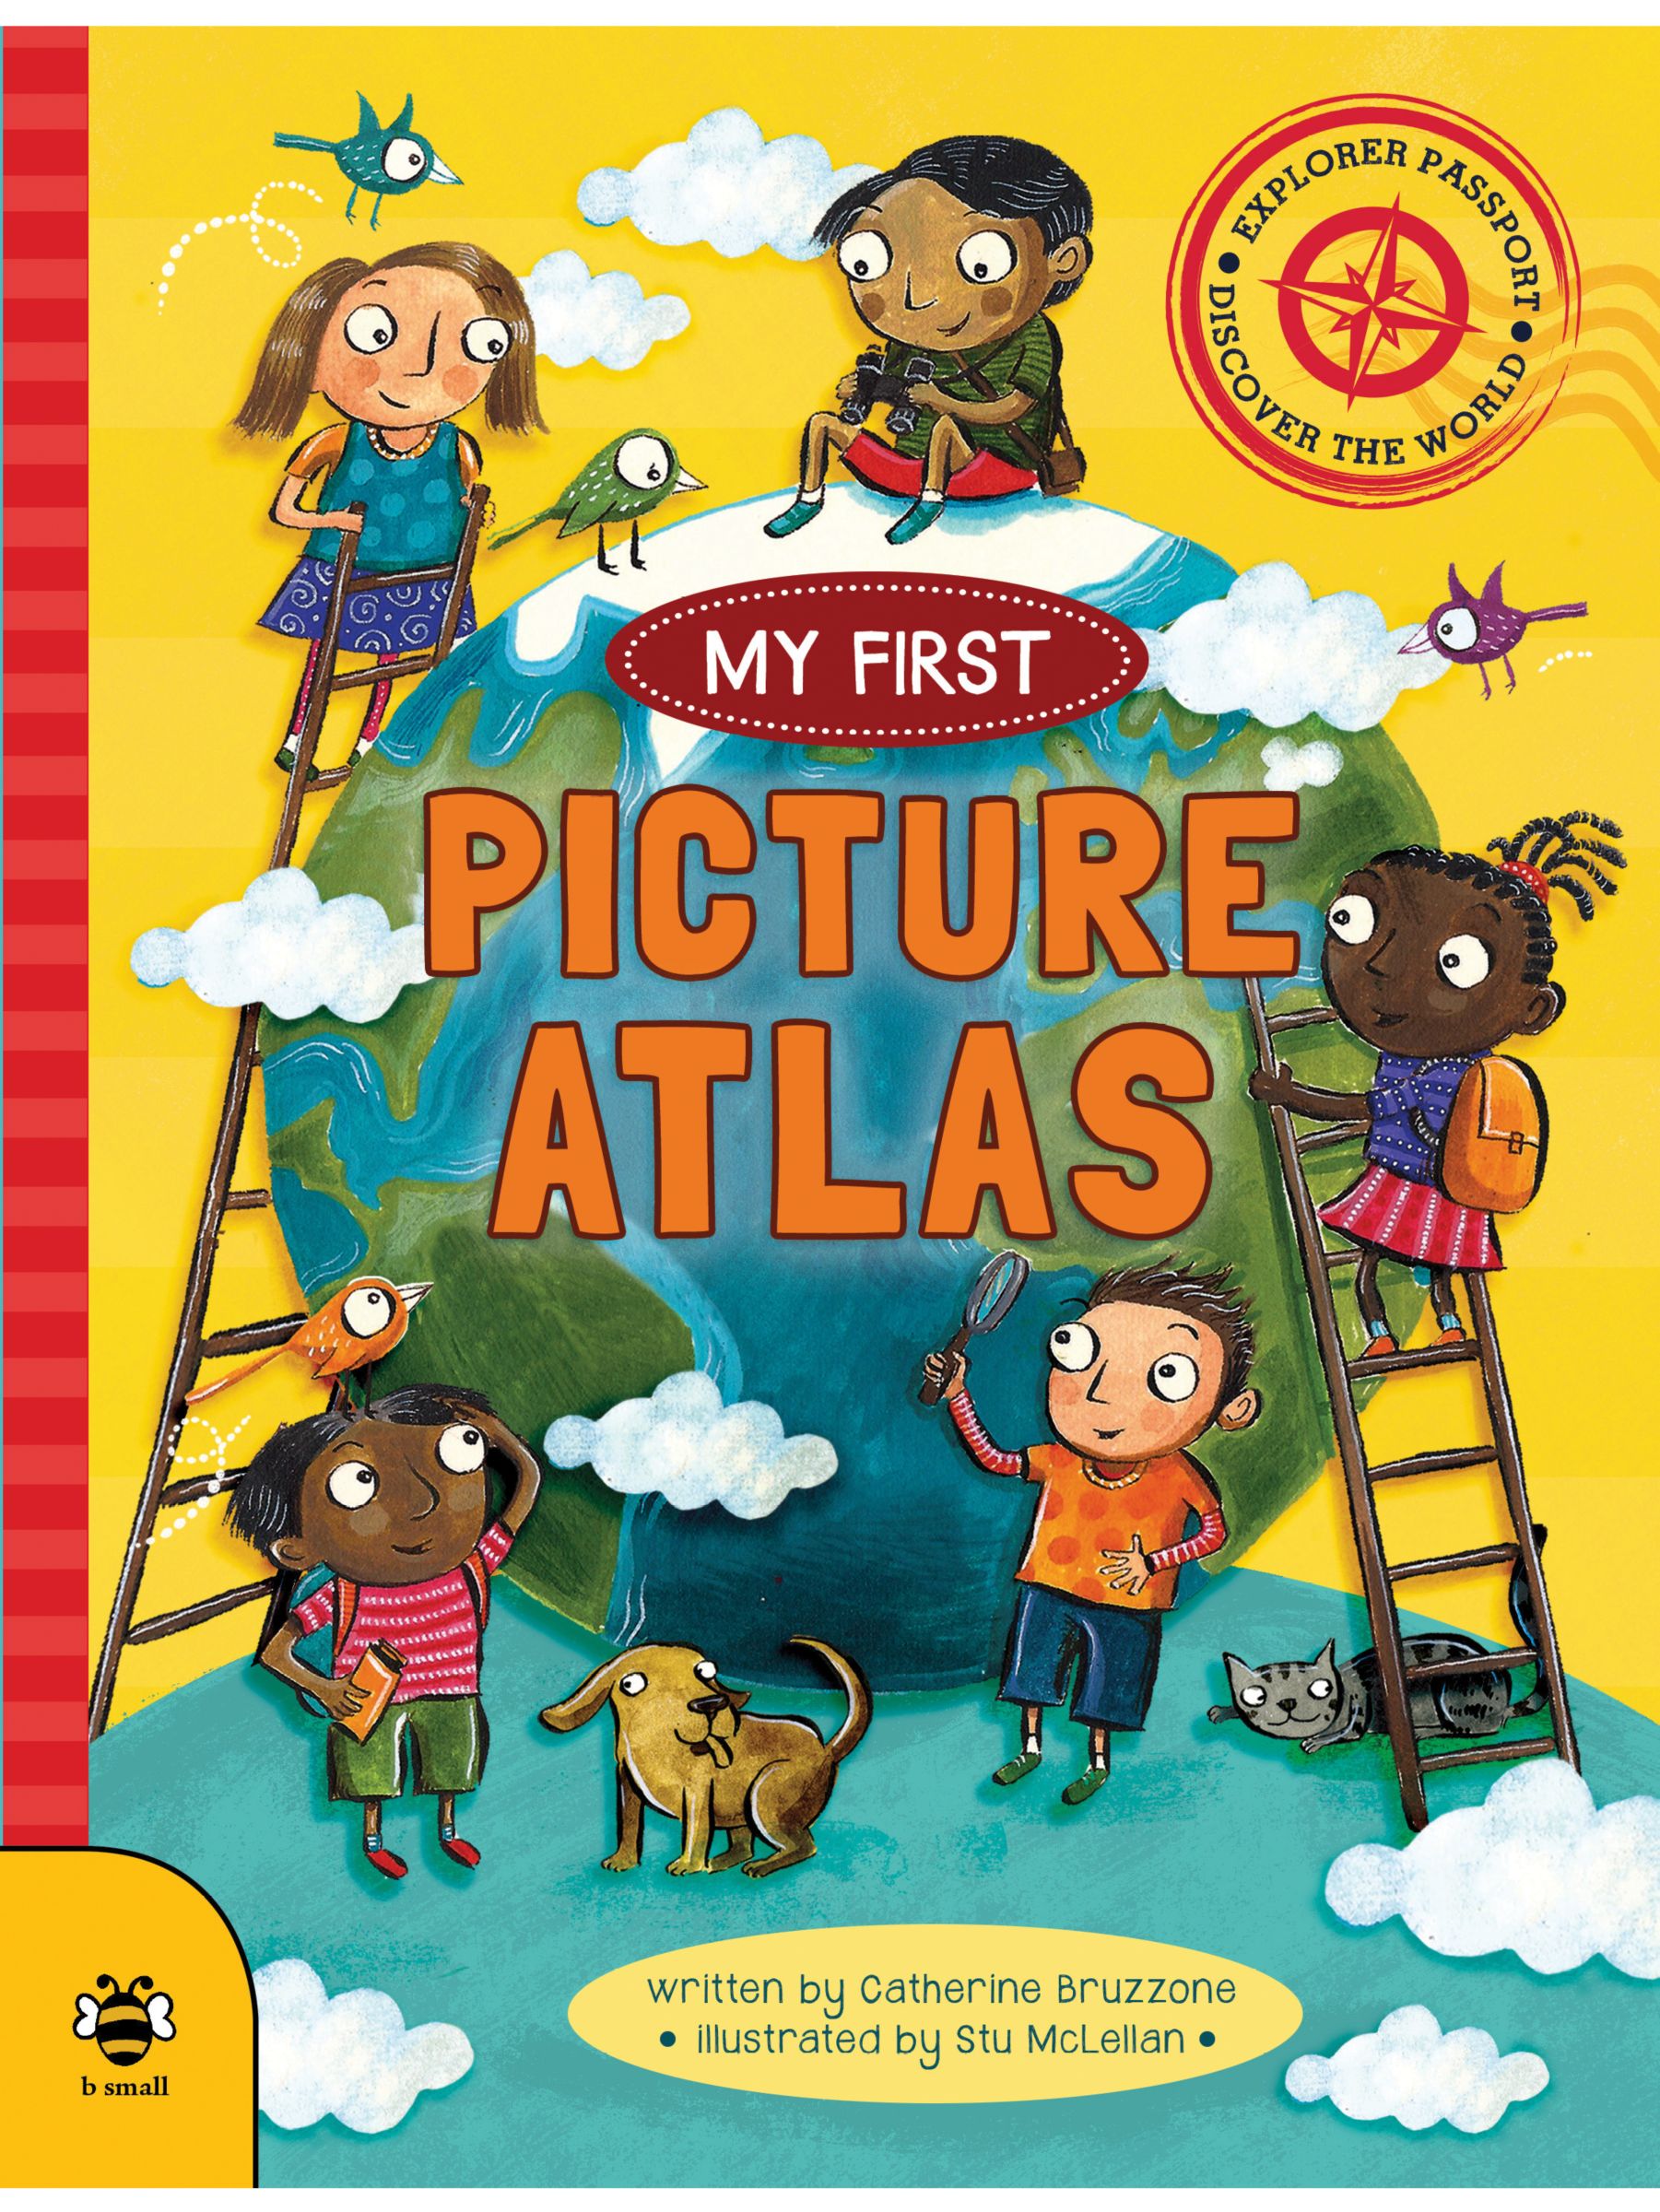 My First Picture Atlas Childrens Book At John Lewis And Partners